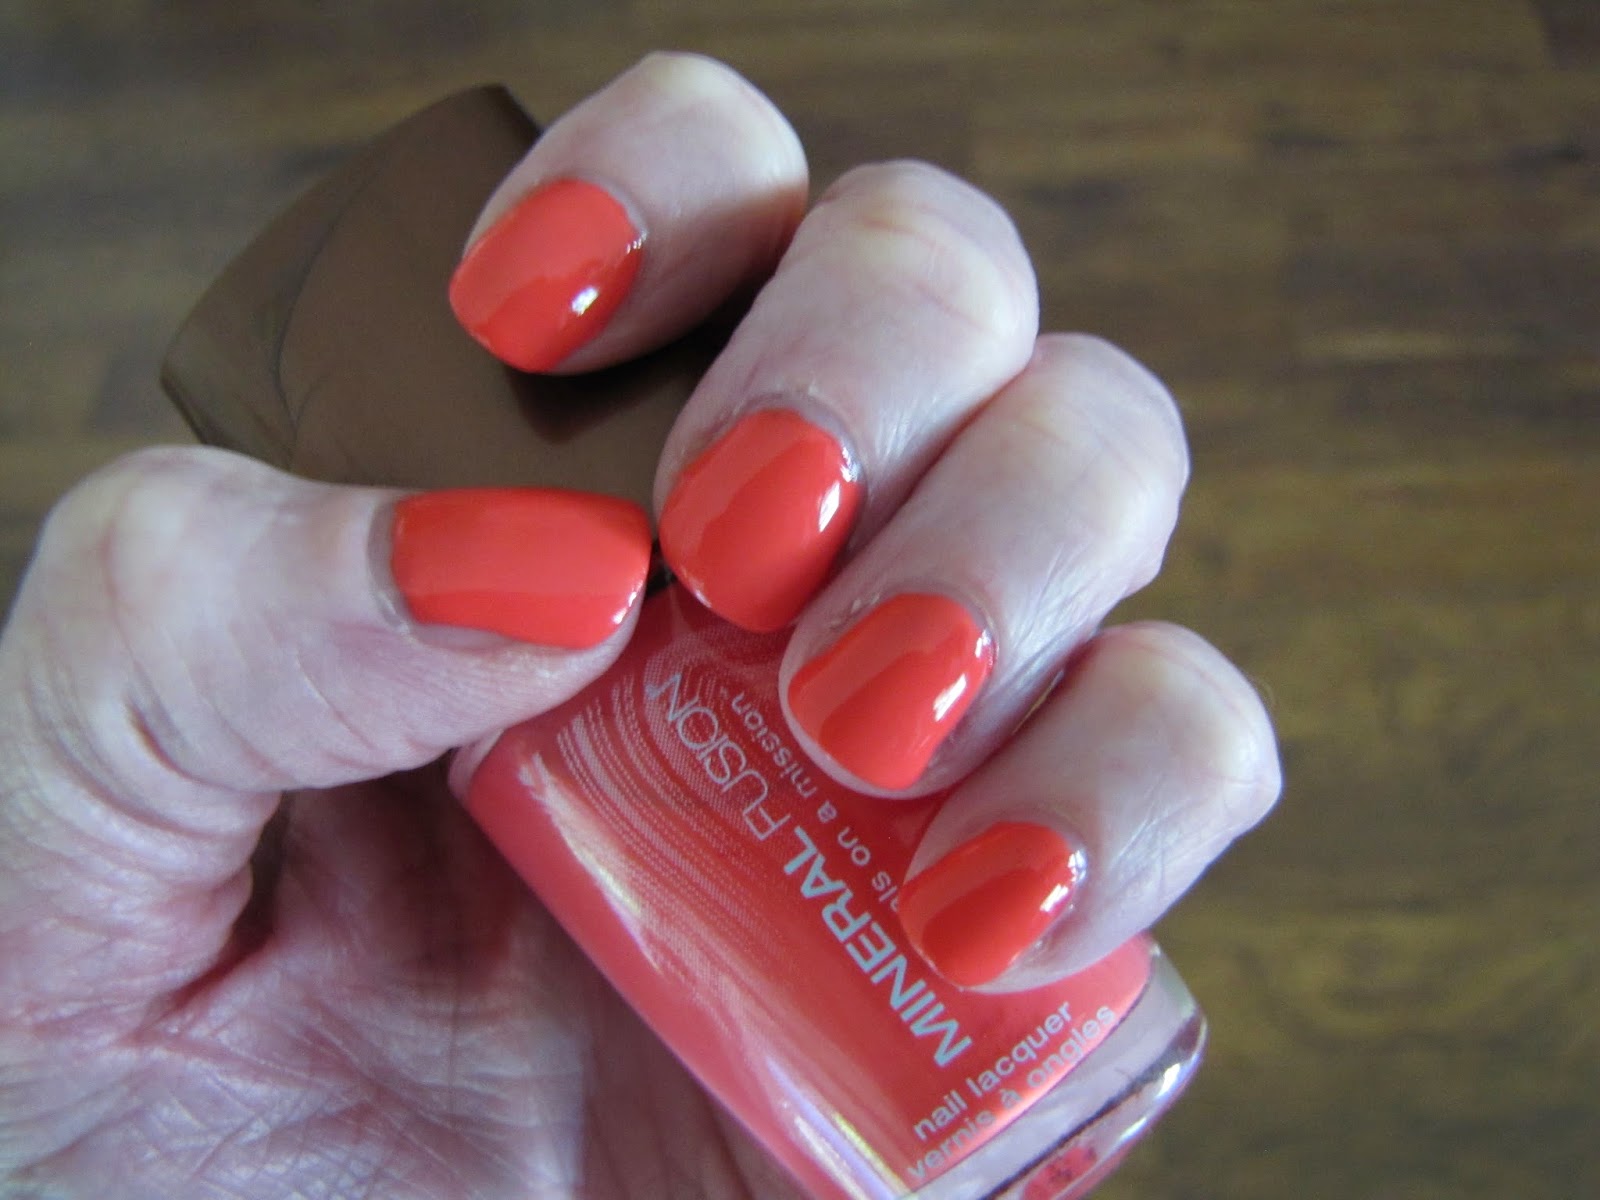 8. Sinful Colors Professional Nail Polish in "Island Coral" - wide 4